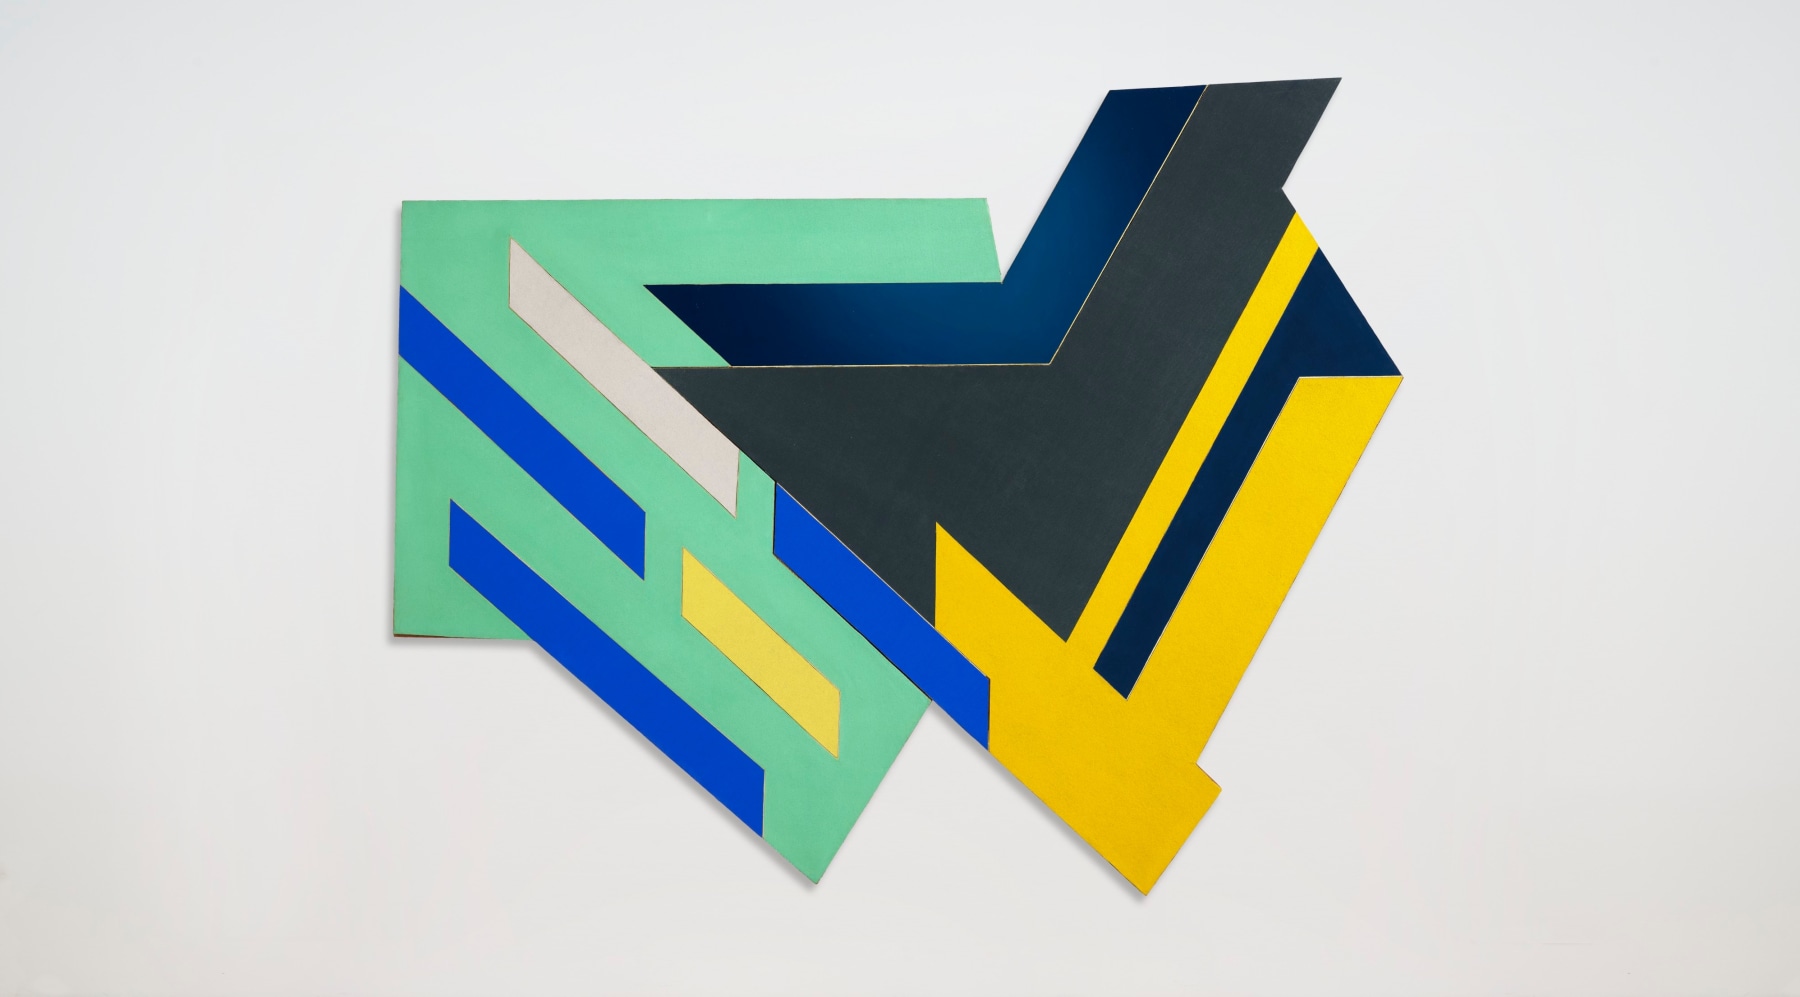 Frank Stella

Bogoria I

1971

alkyd, enamel and felt on canvas and cardboard on two joined panel constructions

90 x 109 x 3 1/2 inches (228.6 x 276.9 x 8.9 cm)